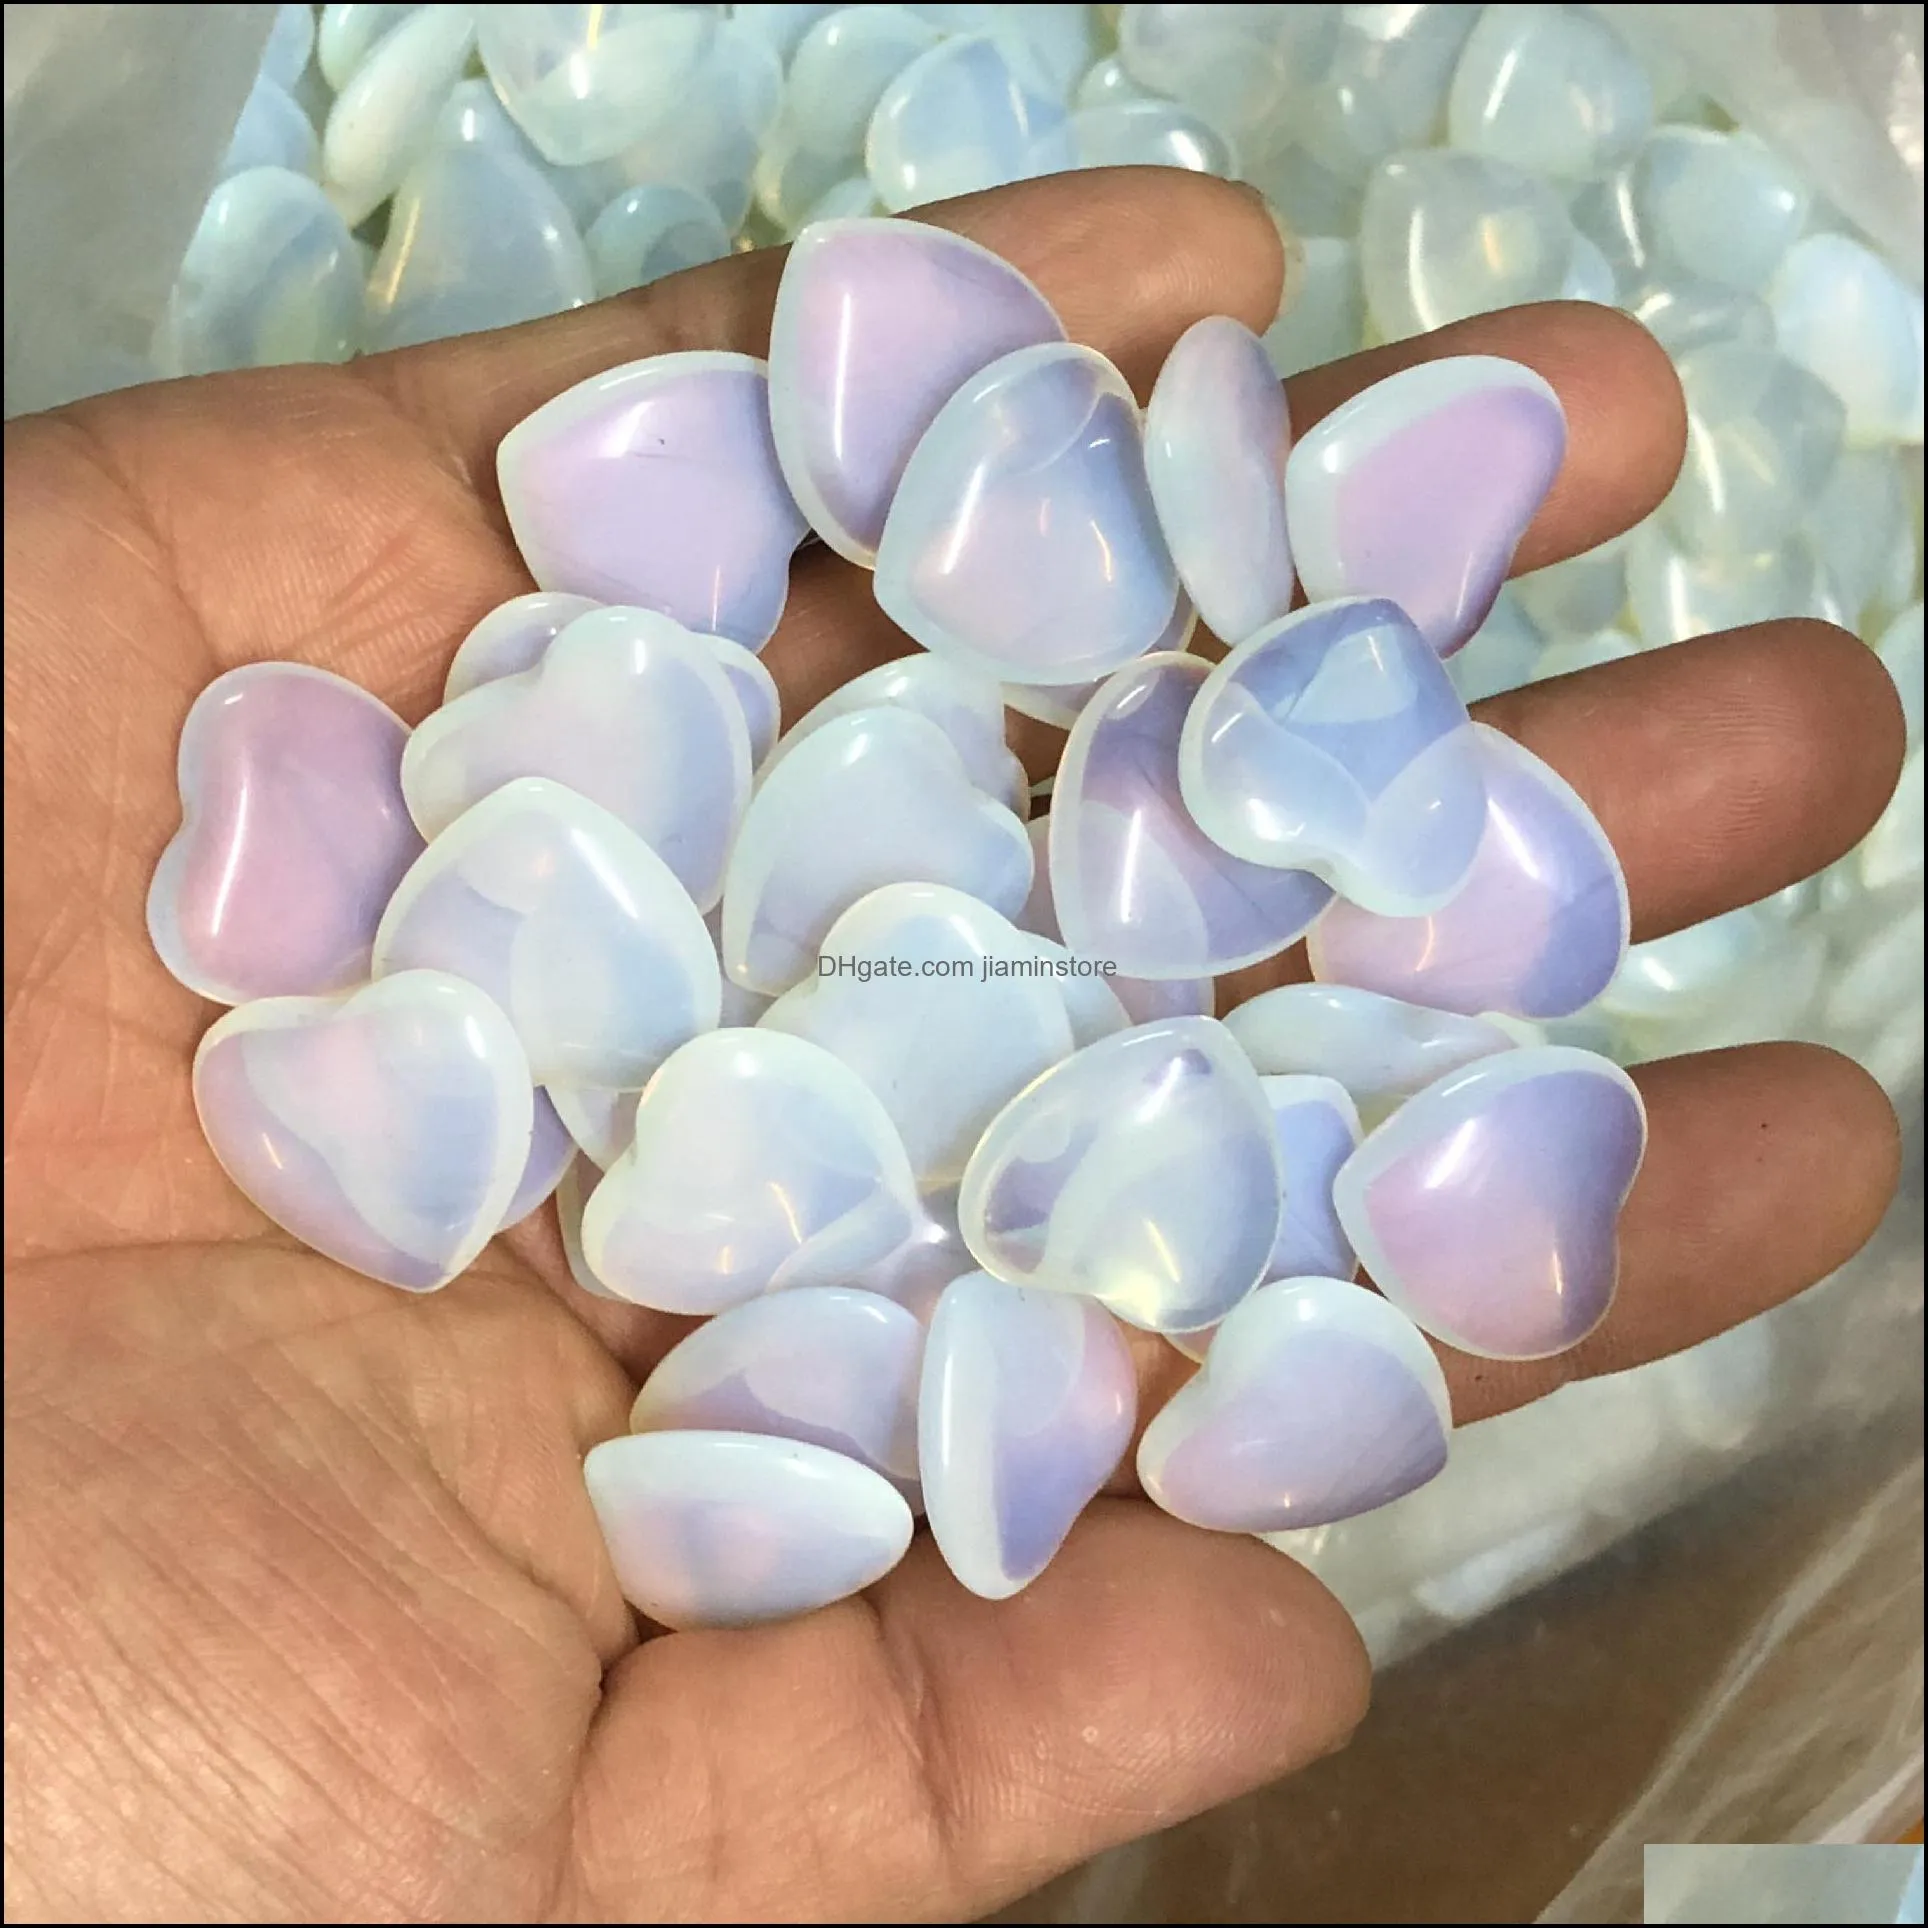 20mmx6mm heart statue carved decoration glass opal stone gift room ornament deco jiaminstore